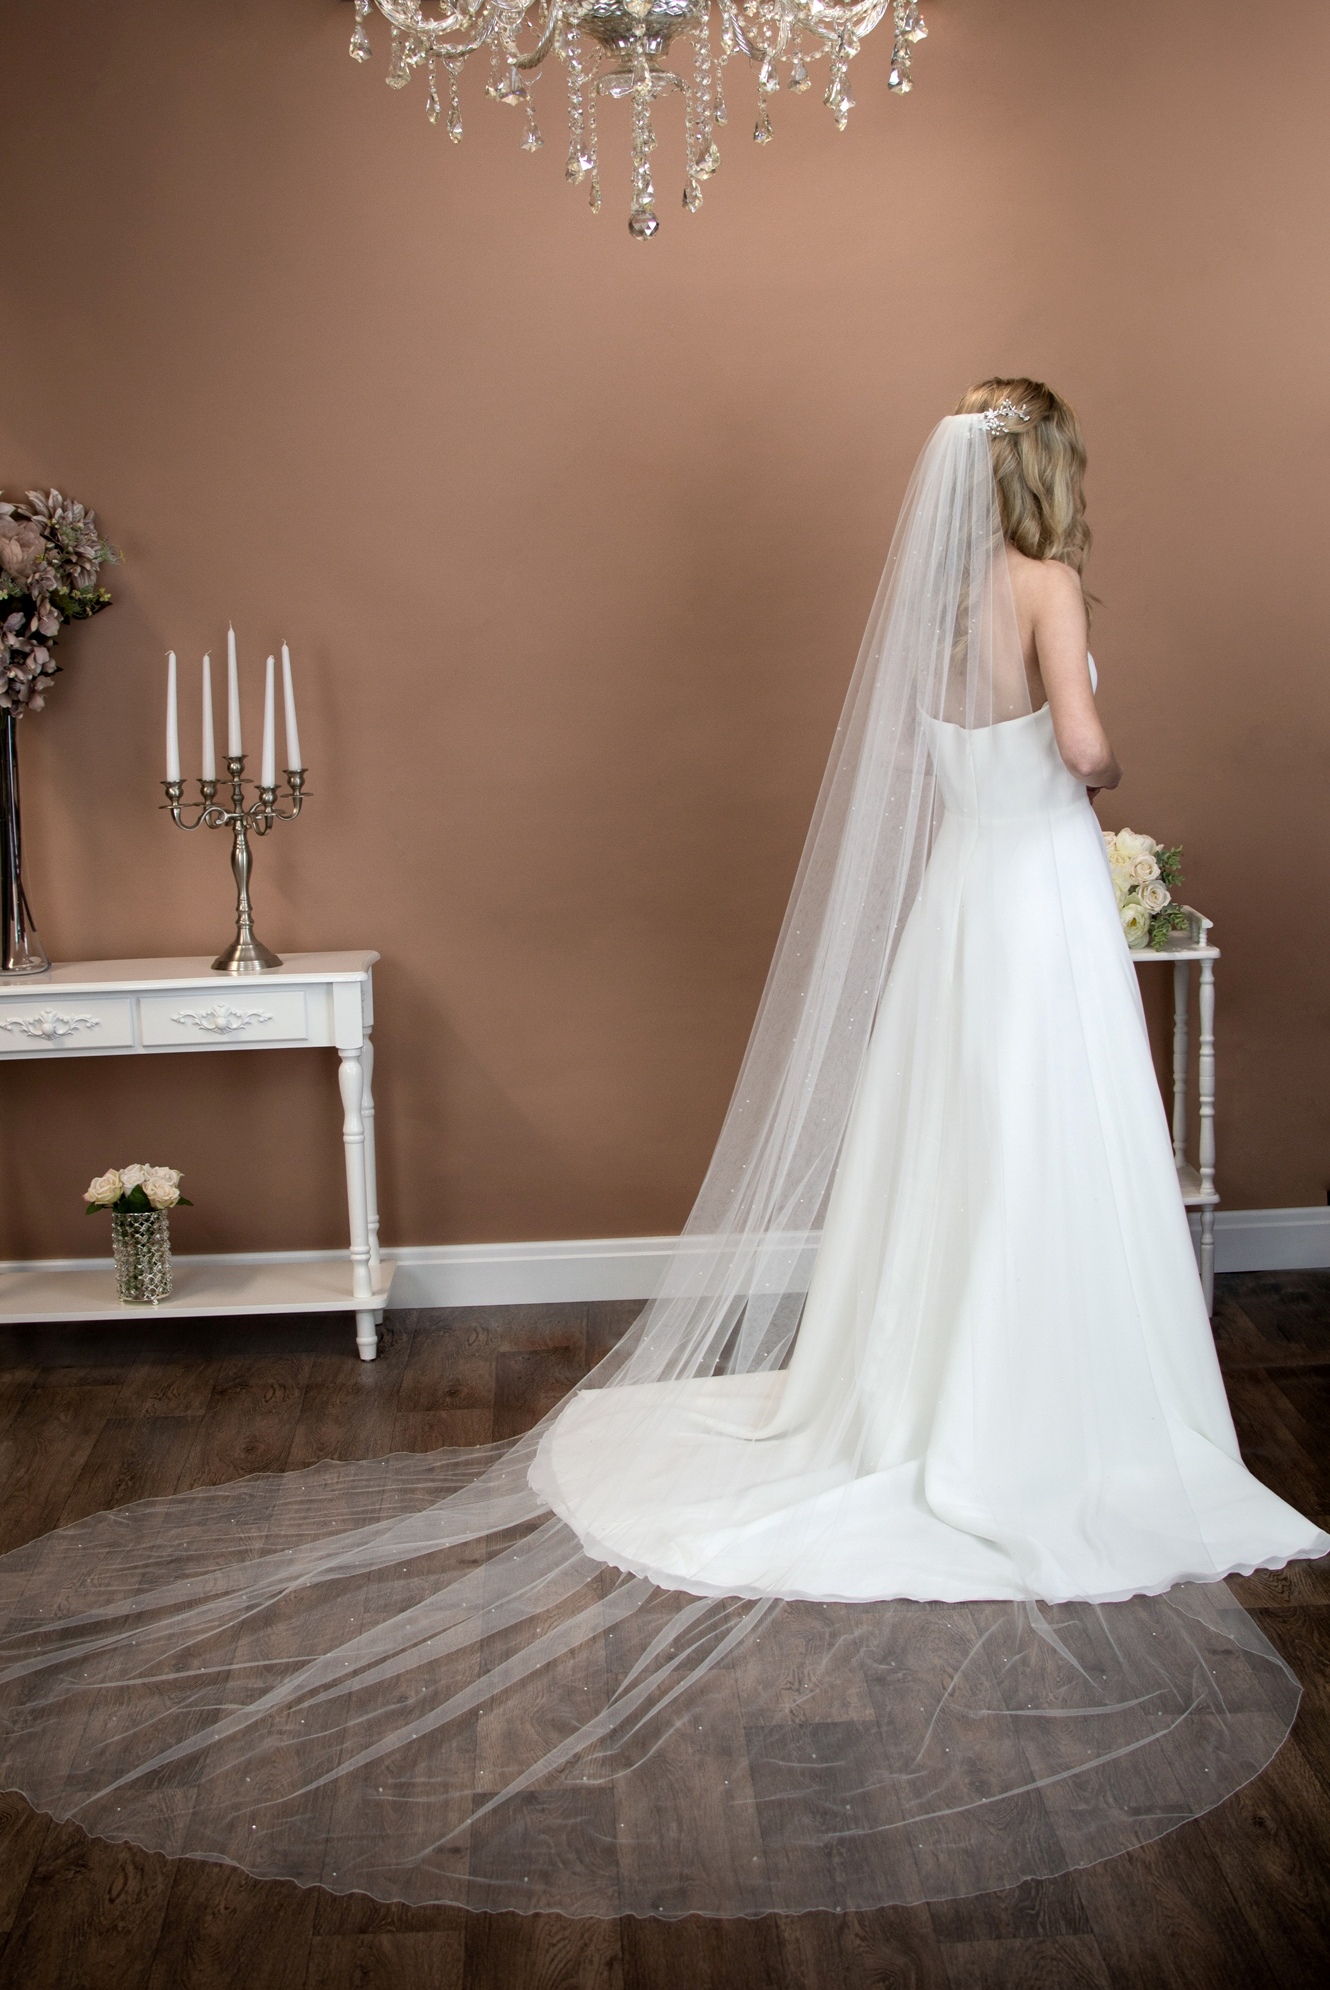 Alexis cathedral length wedding veil with pearls and crystals on bride - The Wedding Veil Shop: Wedding Veil Lengths + Styles for Every Bride